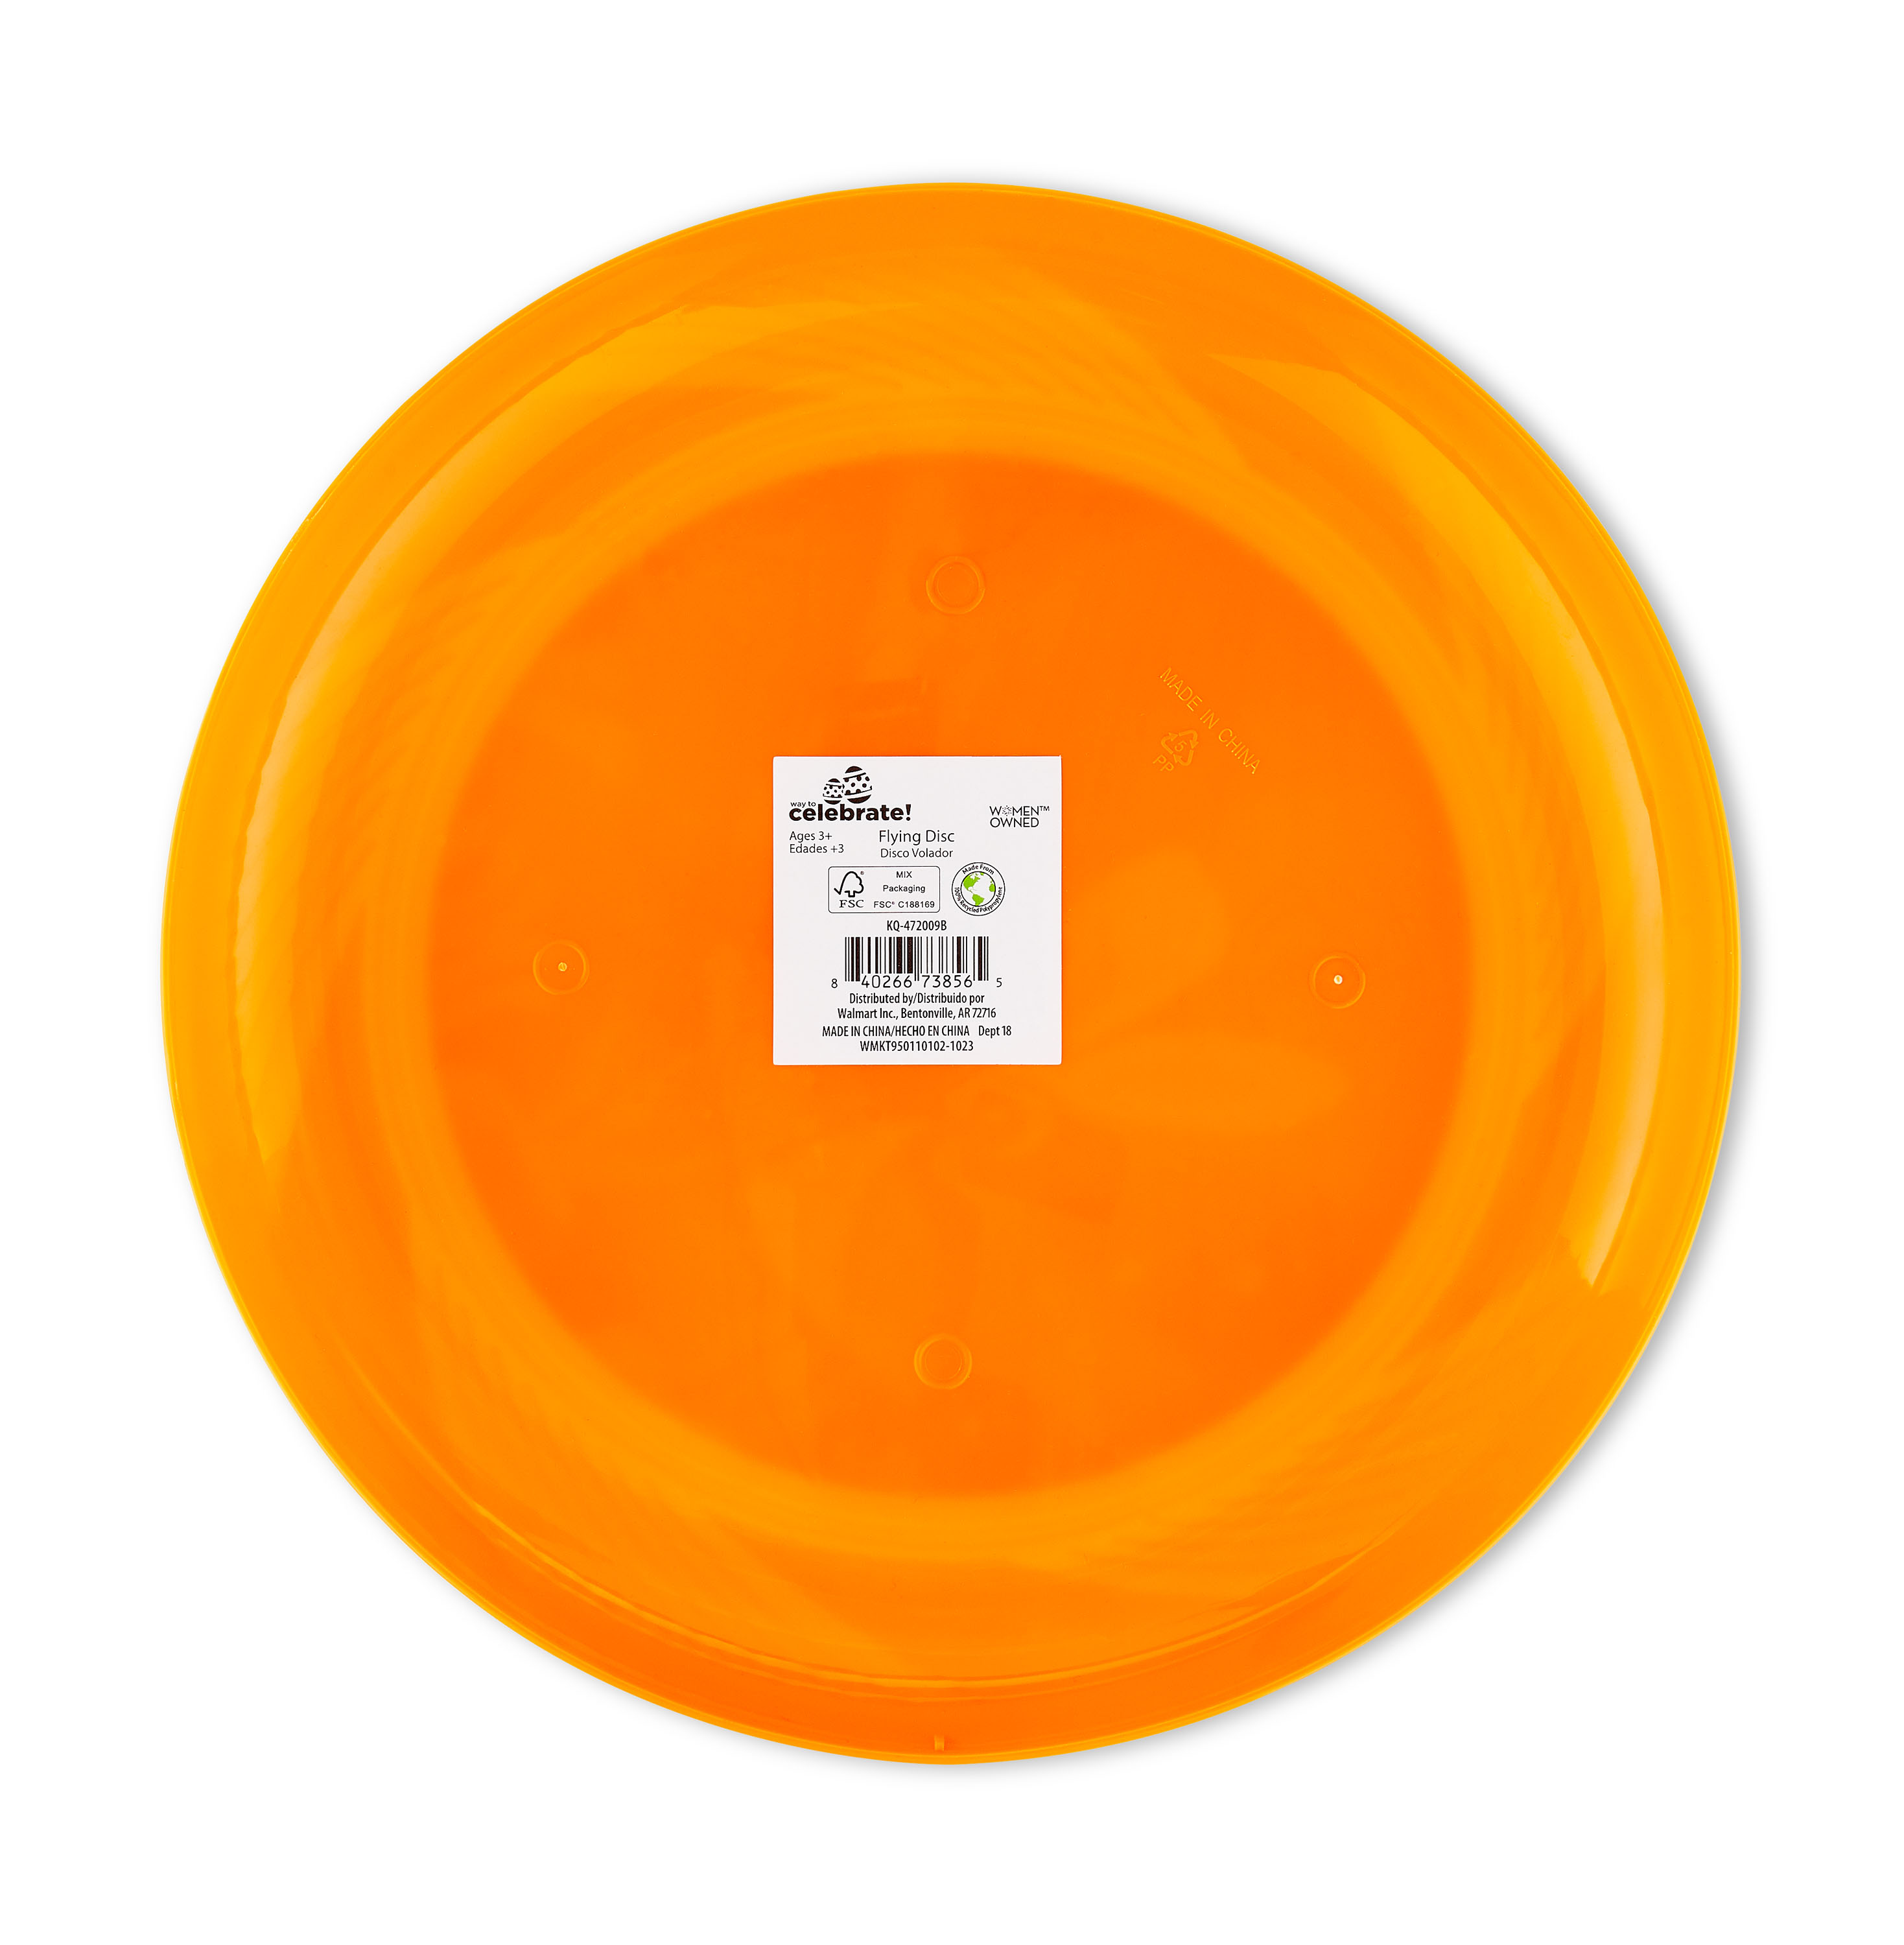 Easter Orange Shark Flying Disc, by Way To Celebrate - image 4 of 6